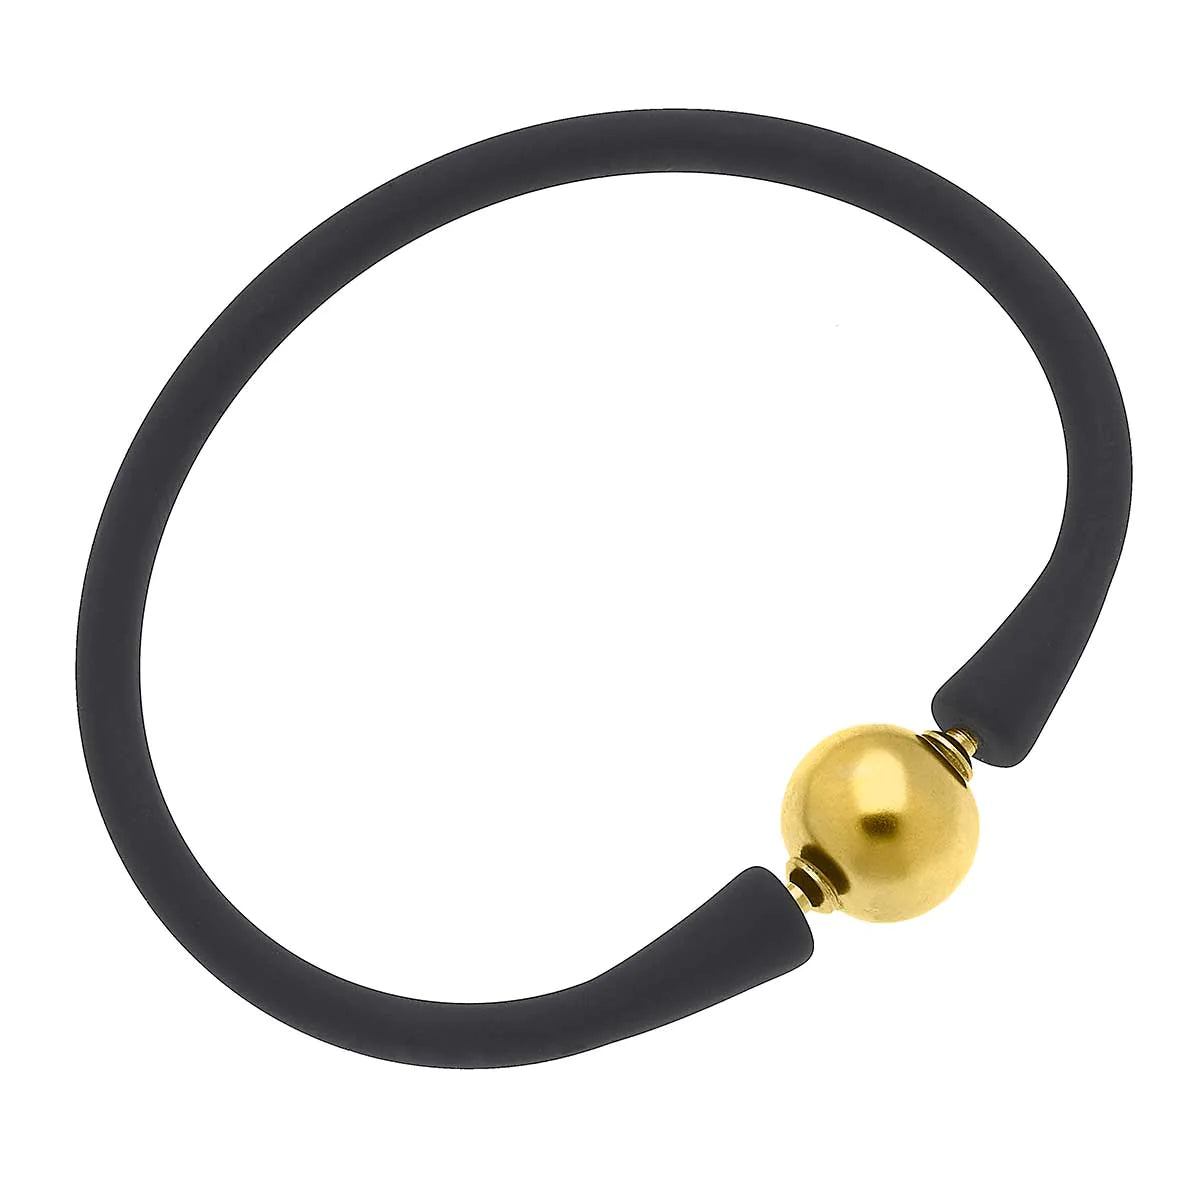 Bali 24K Gold Plated Ball Bead Silicone Bracelet in Black